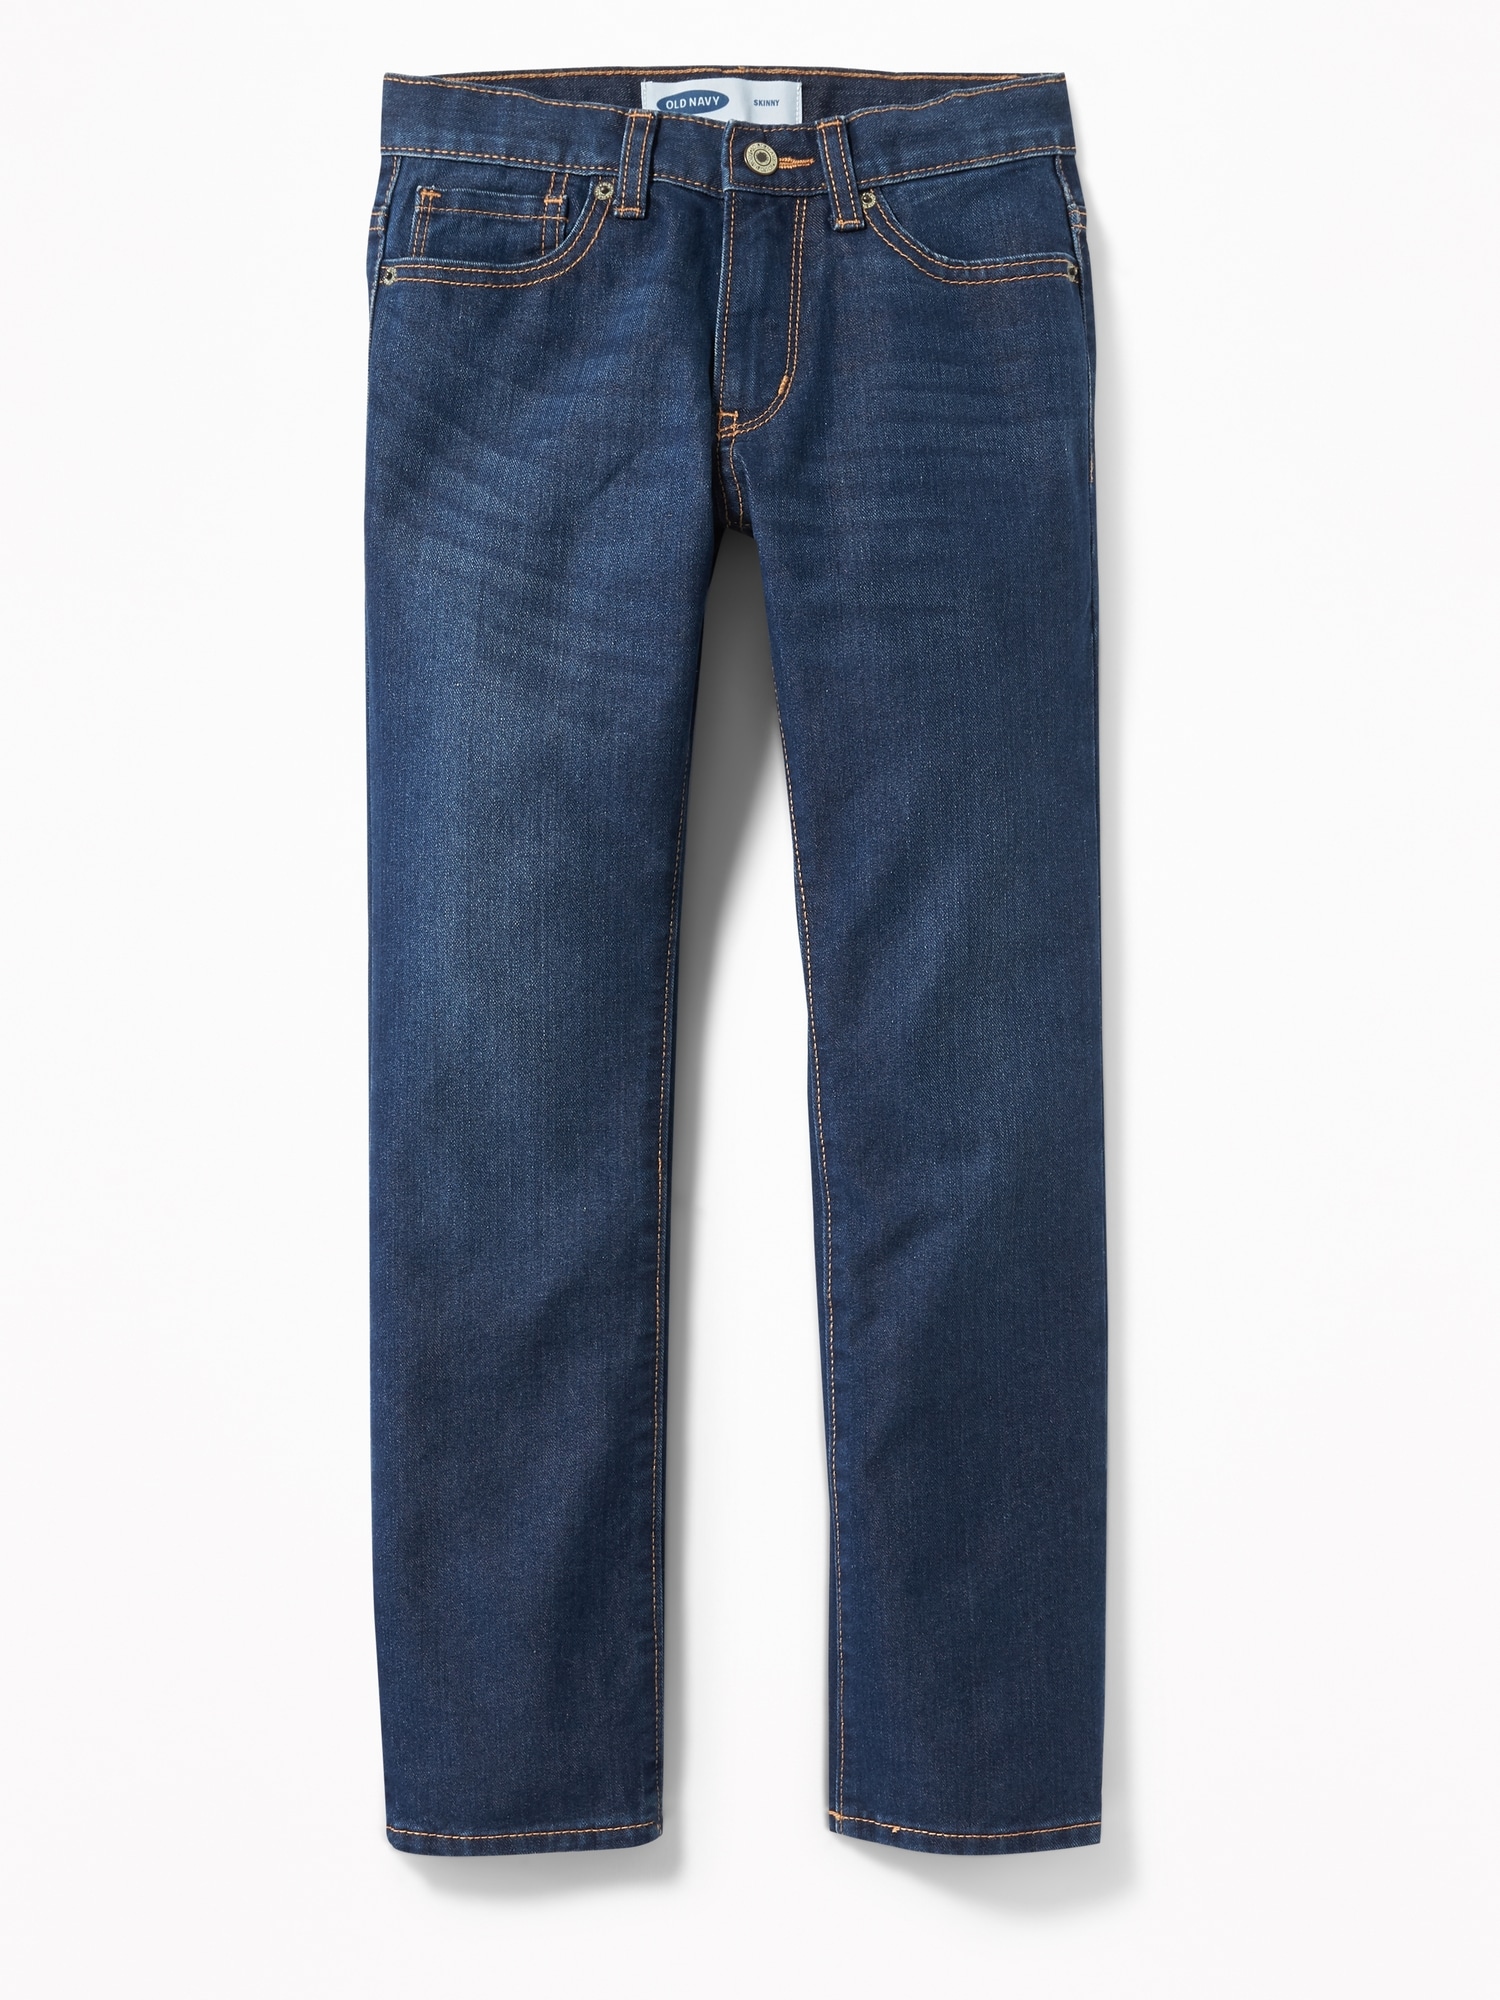 Wow Skinny Non-Stretch Jeans for Boys | Old Navy